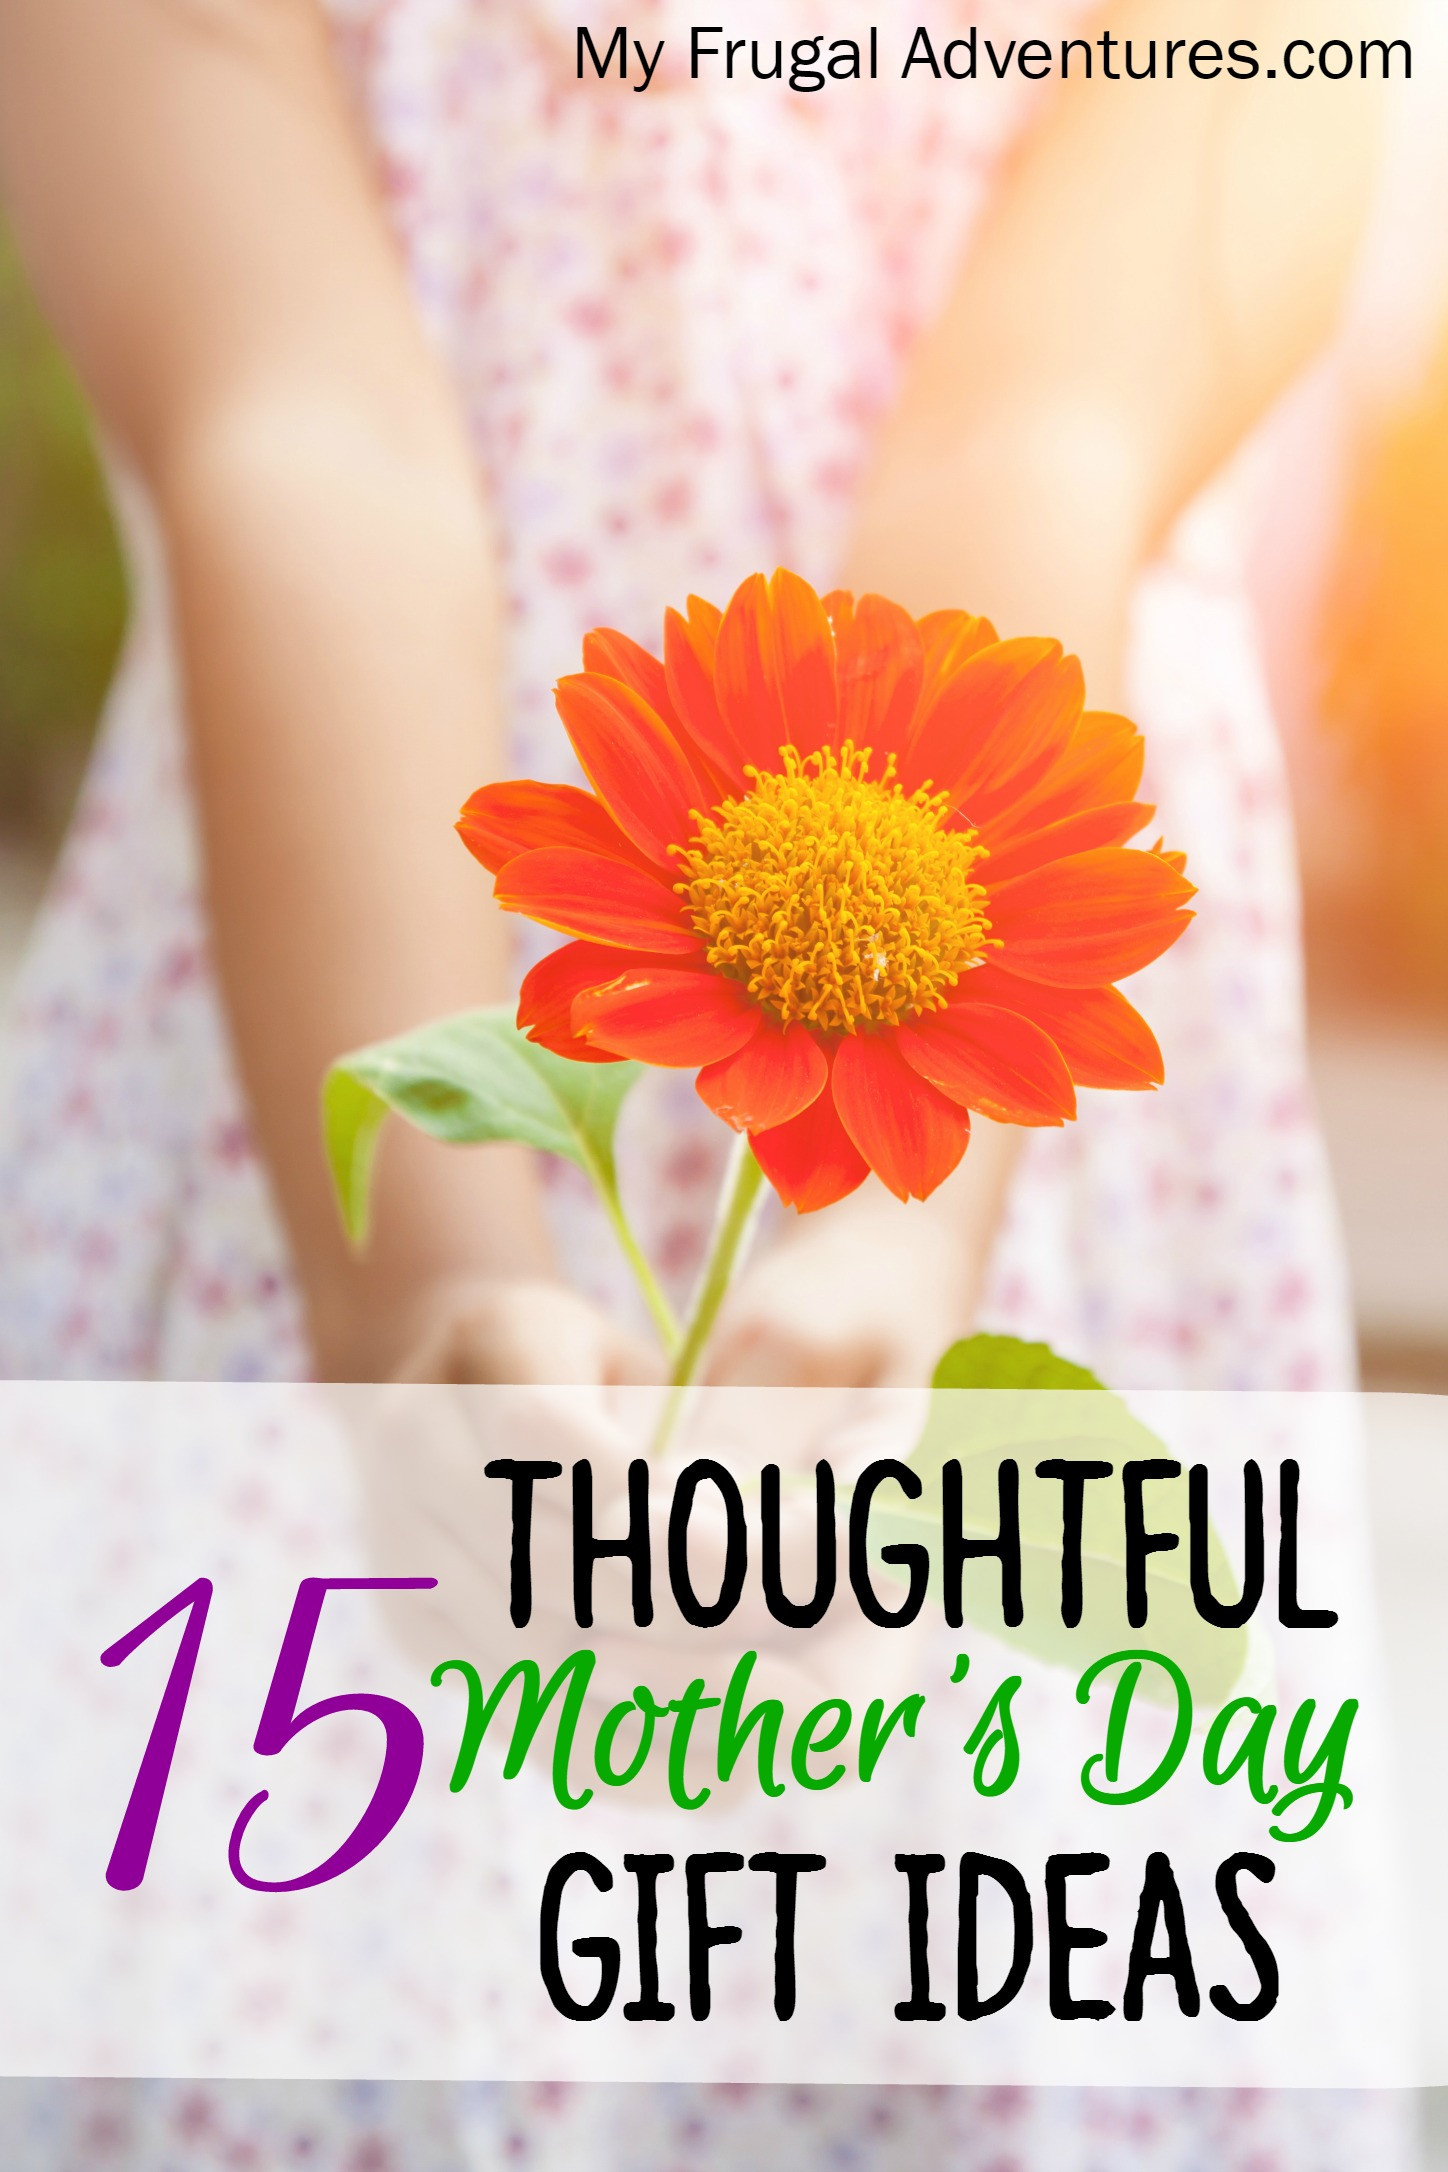 Mother'S Day Gift Ideas For My Wife
 15 Thoughtful Mother s Day Gift Ideas My Frugal Adventures